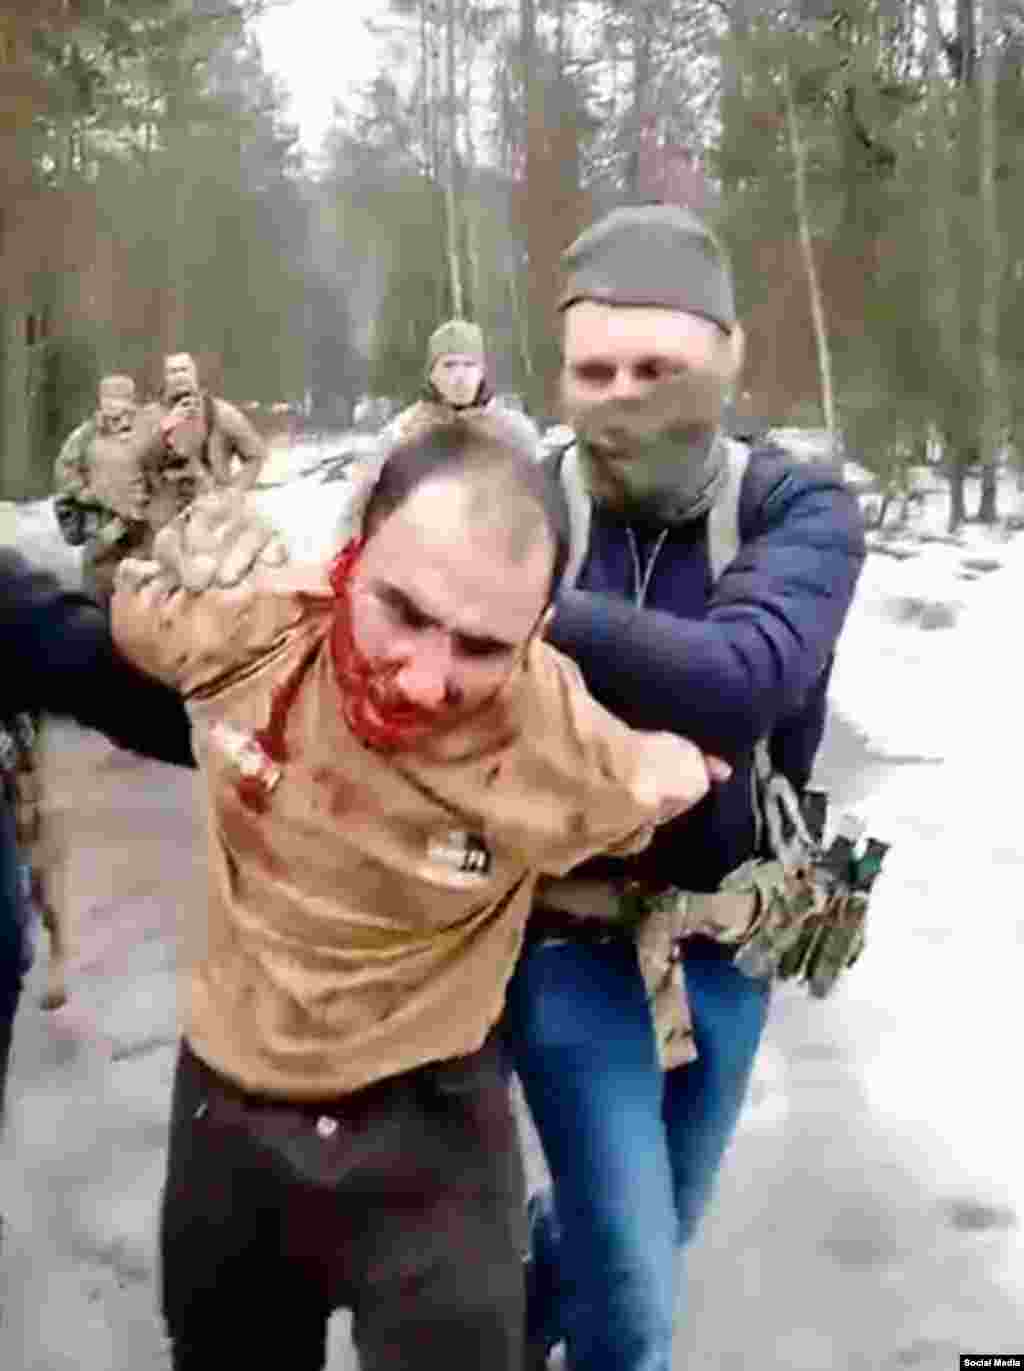 Saidakram Rajabalizoda is seen as he is led away after reportedly having his ear sliced off by uniformed men who caught him in a forest in Russia&#39;s Bryansk region on March 23. The Russian Grey Zone Telegram channel, which is connected to the Wagner group, published a video purportedly showing Rajabalizoda&rsquo;s ear being cut off and security agents trying to force him to eat it. A man in the video yells at the suspect: &ldquo;Chew, bastard! I will cut you open and shove it into your mouth.&rdquo;